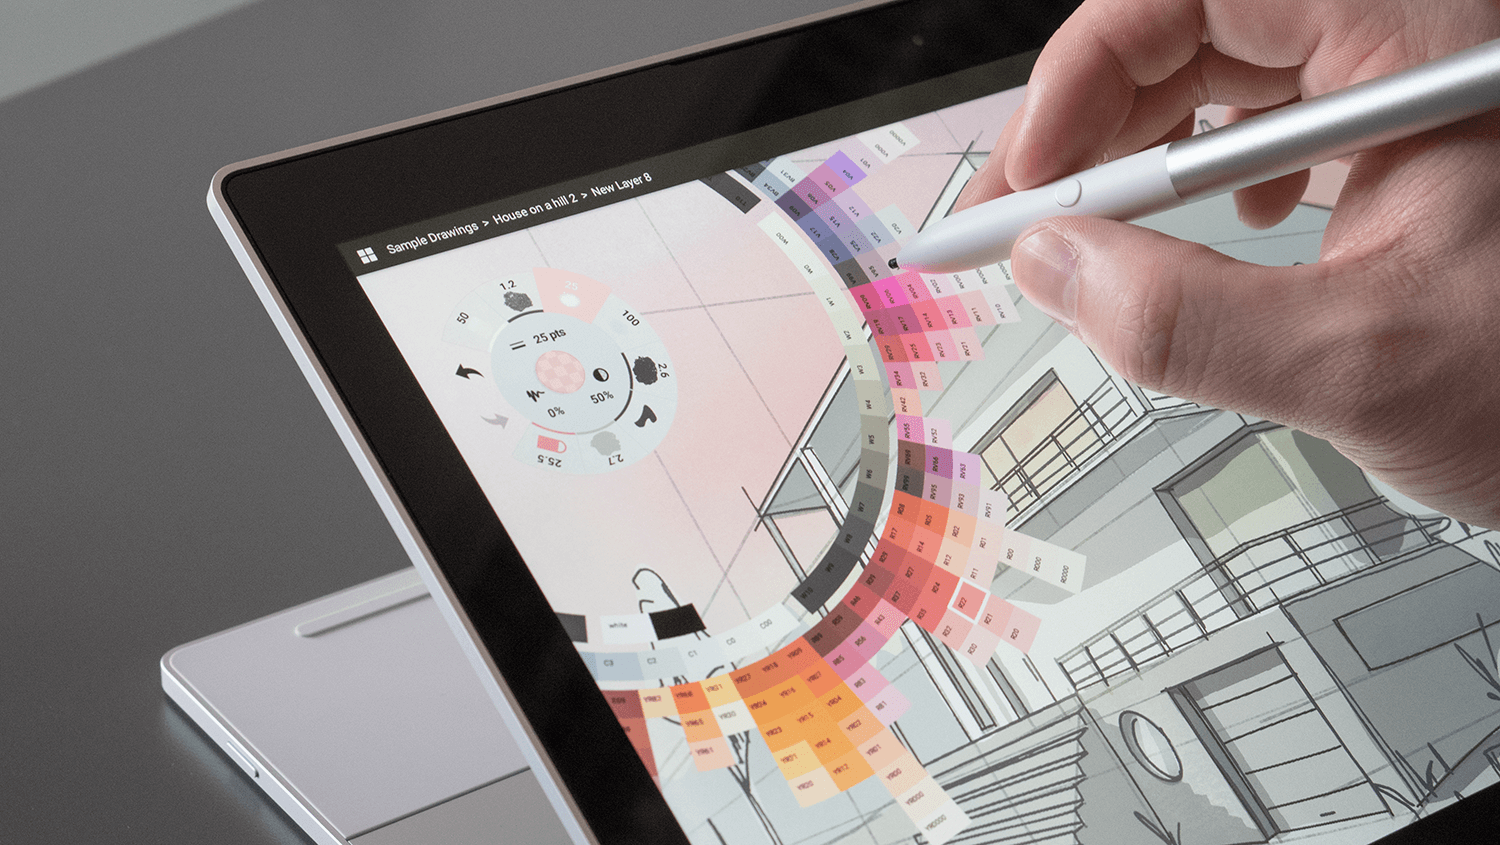 Screen interaction with stylus pen